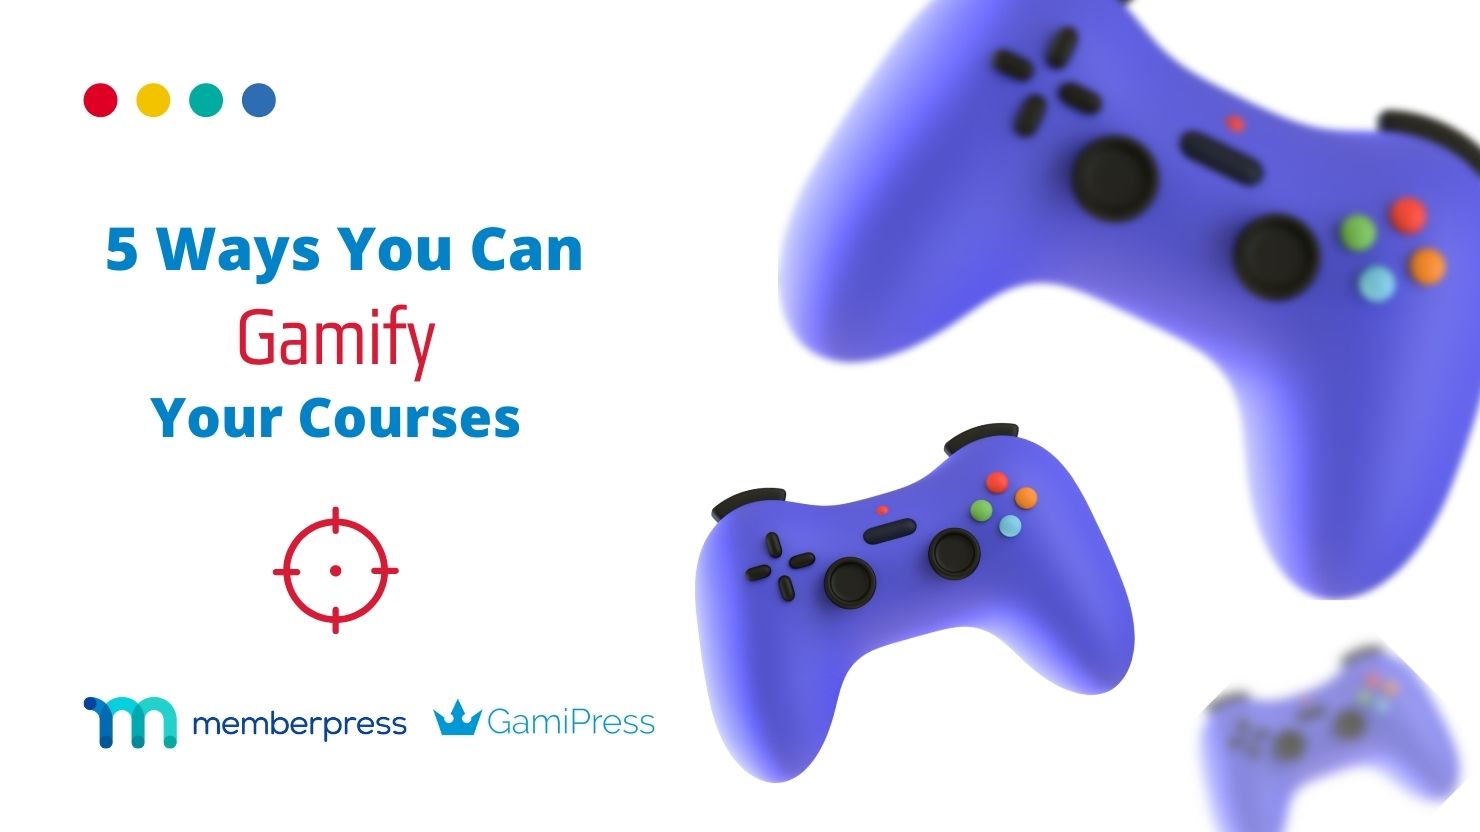 online course gamification with memberpress and gamipress